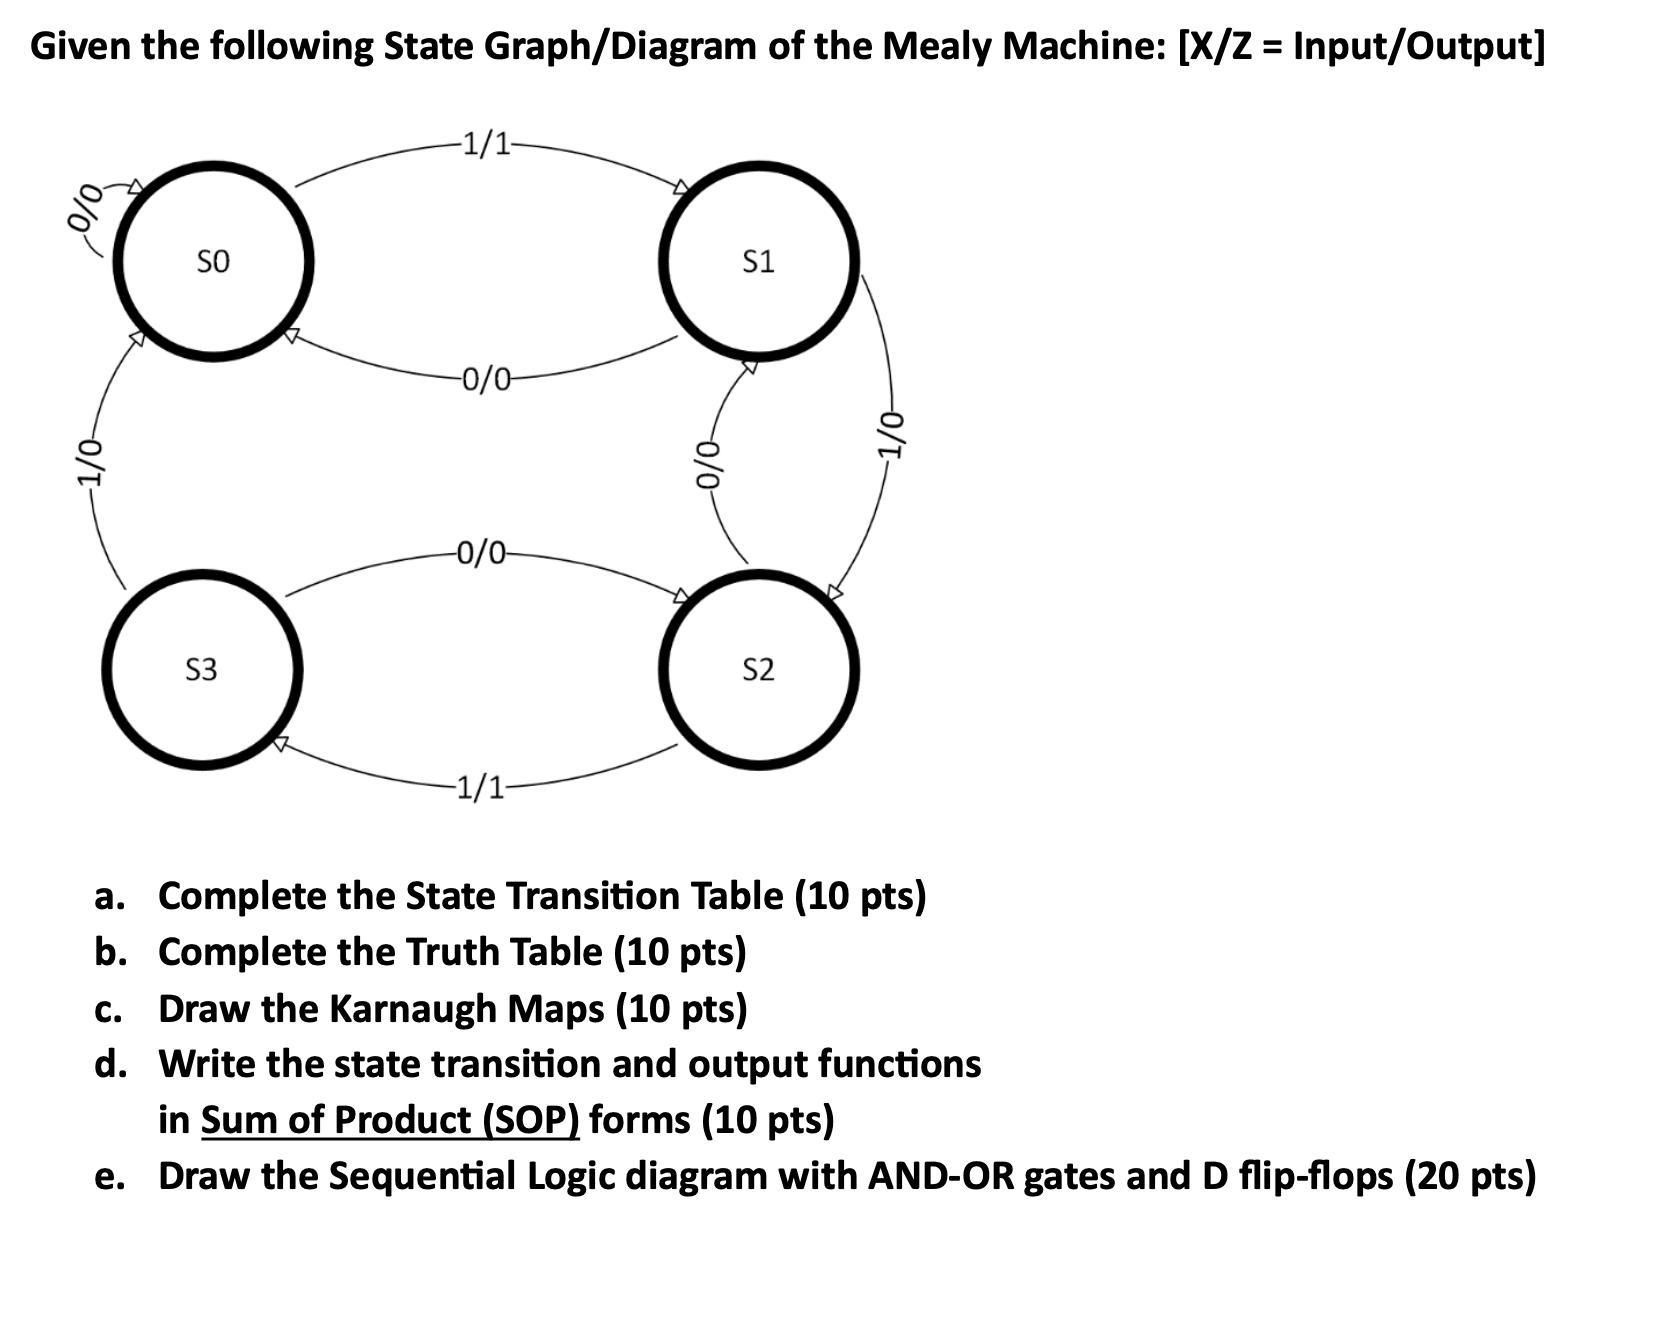 Given the following State Graph/Diagram of the Mealy Machine: [X/Z = Input/Output] 0/0 -1/0- SO S3 7 -1/1-